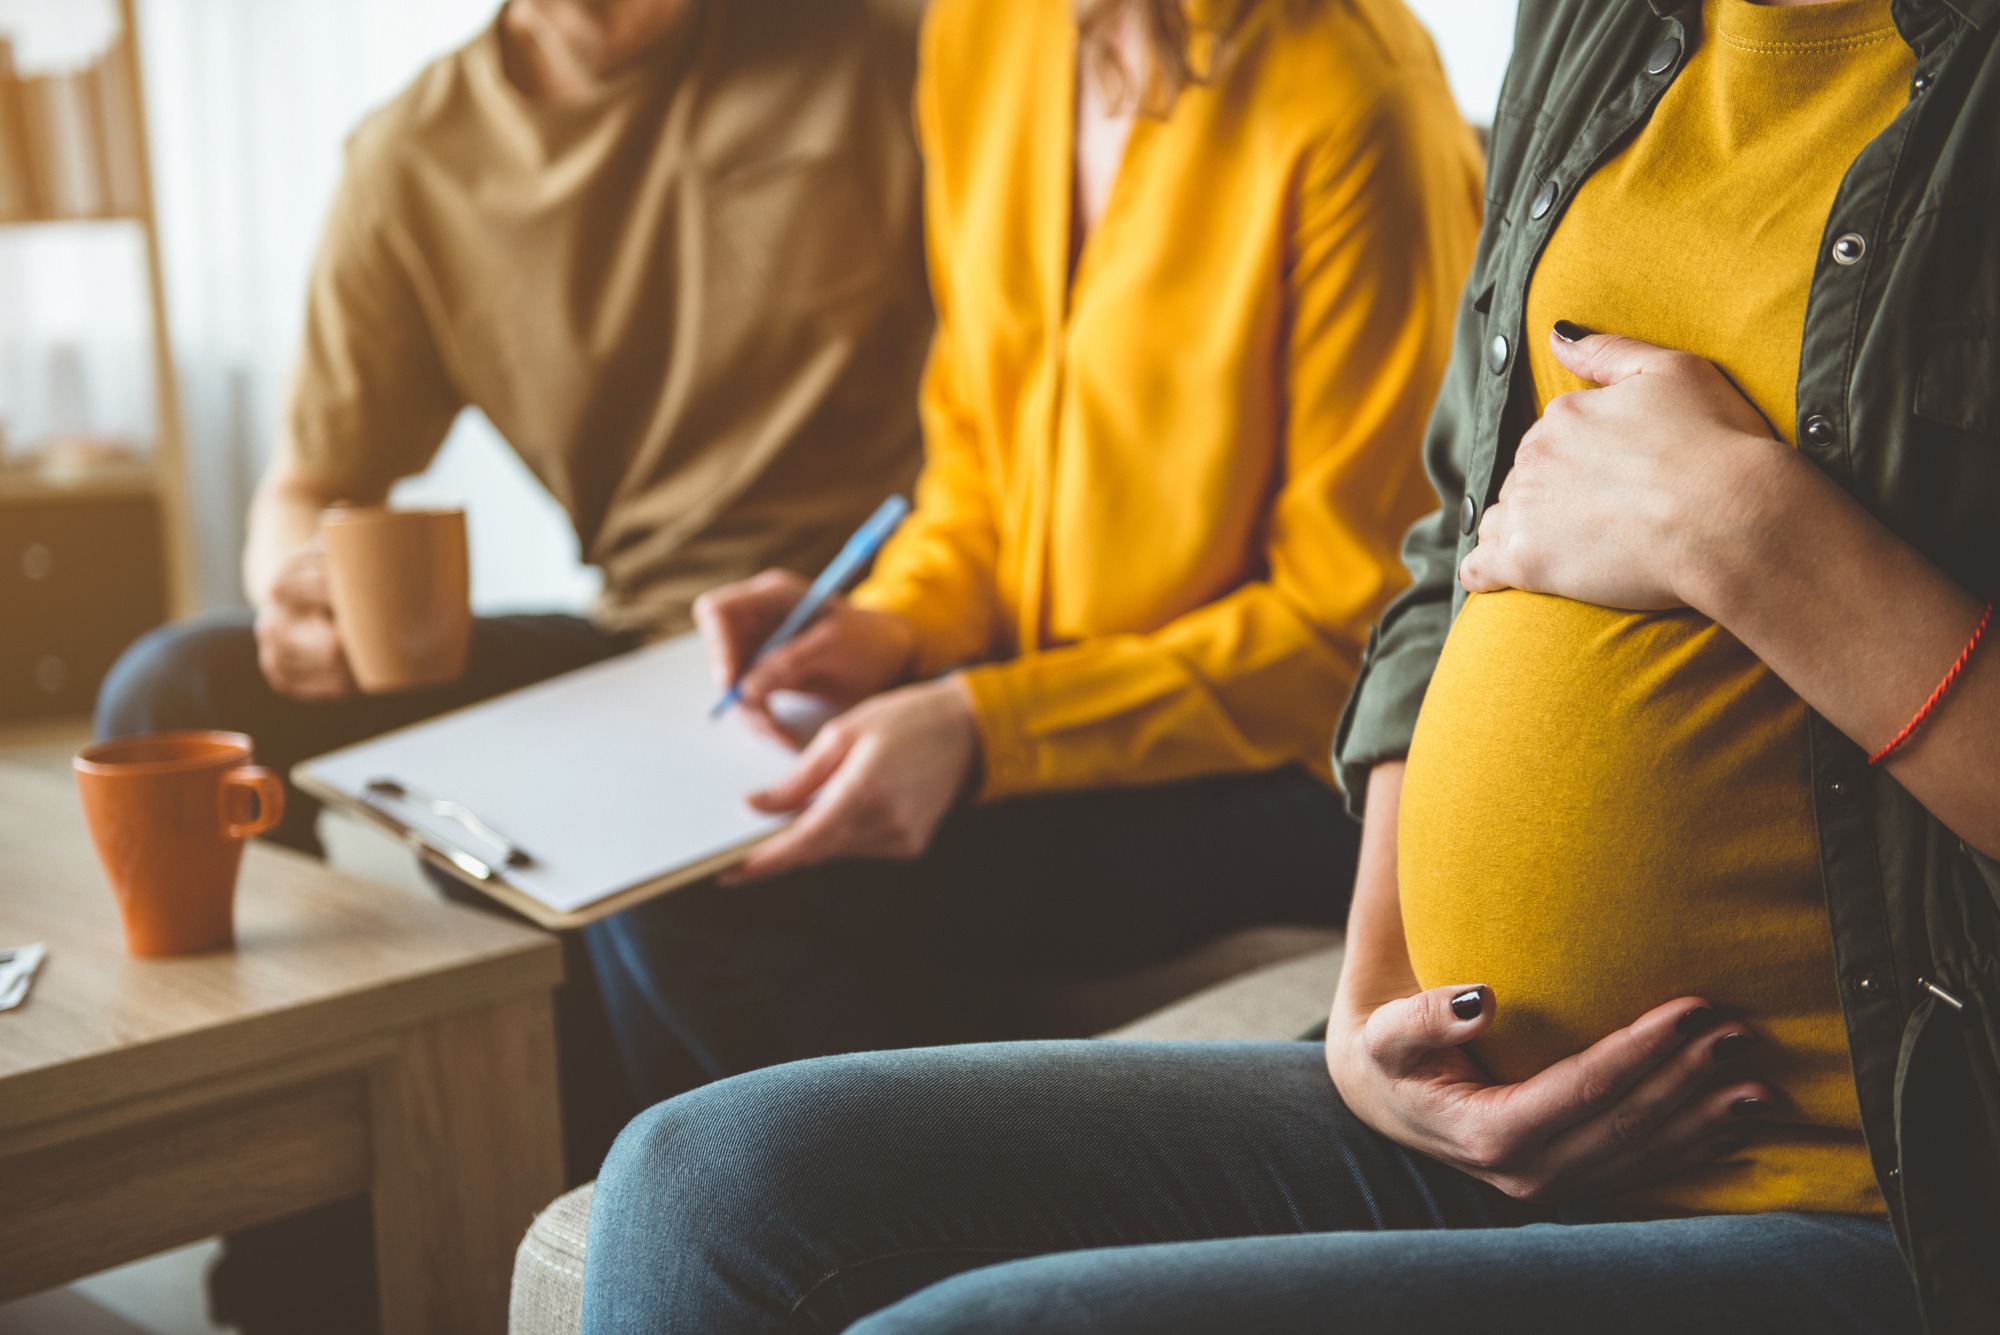 How Surrogacy Is Shaping The Future Of Parenthood